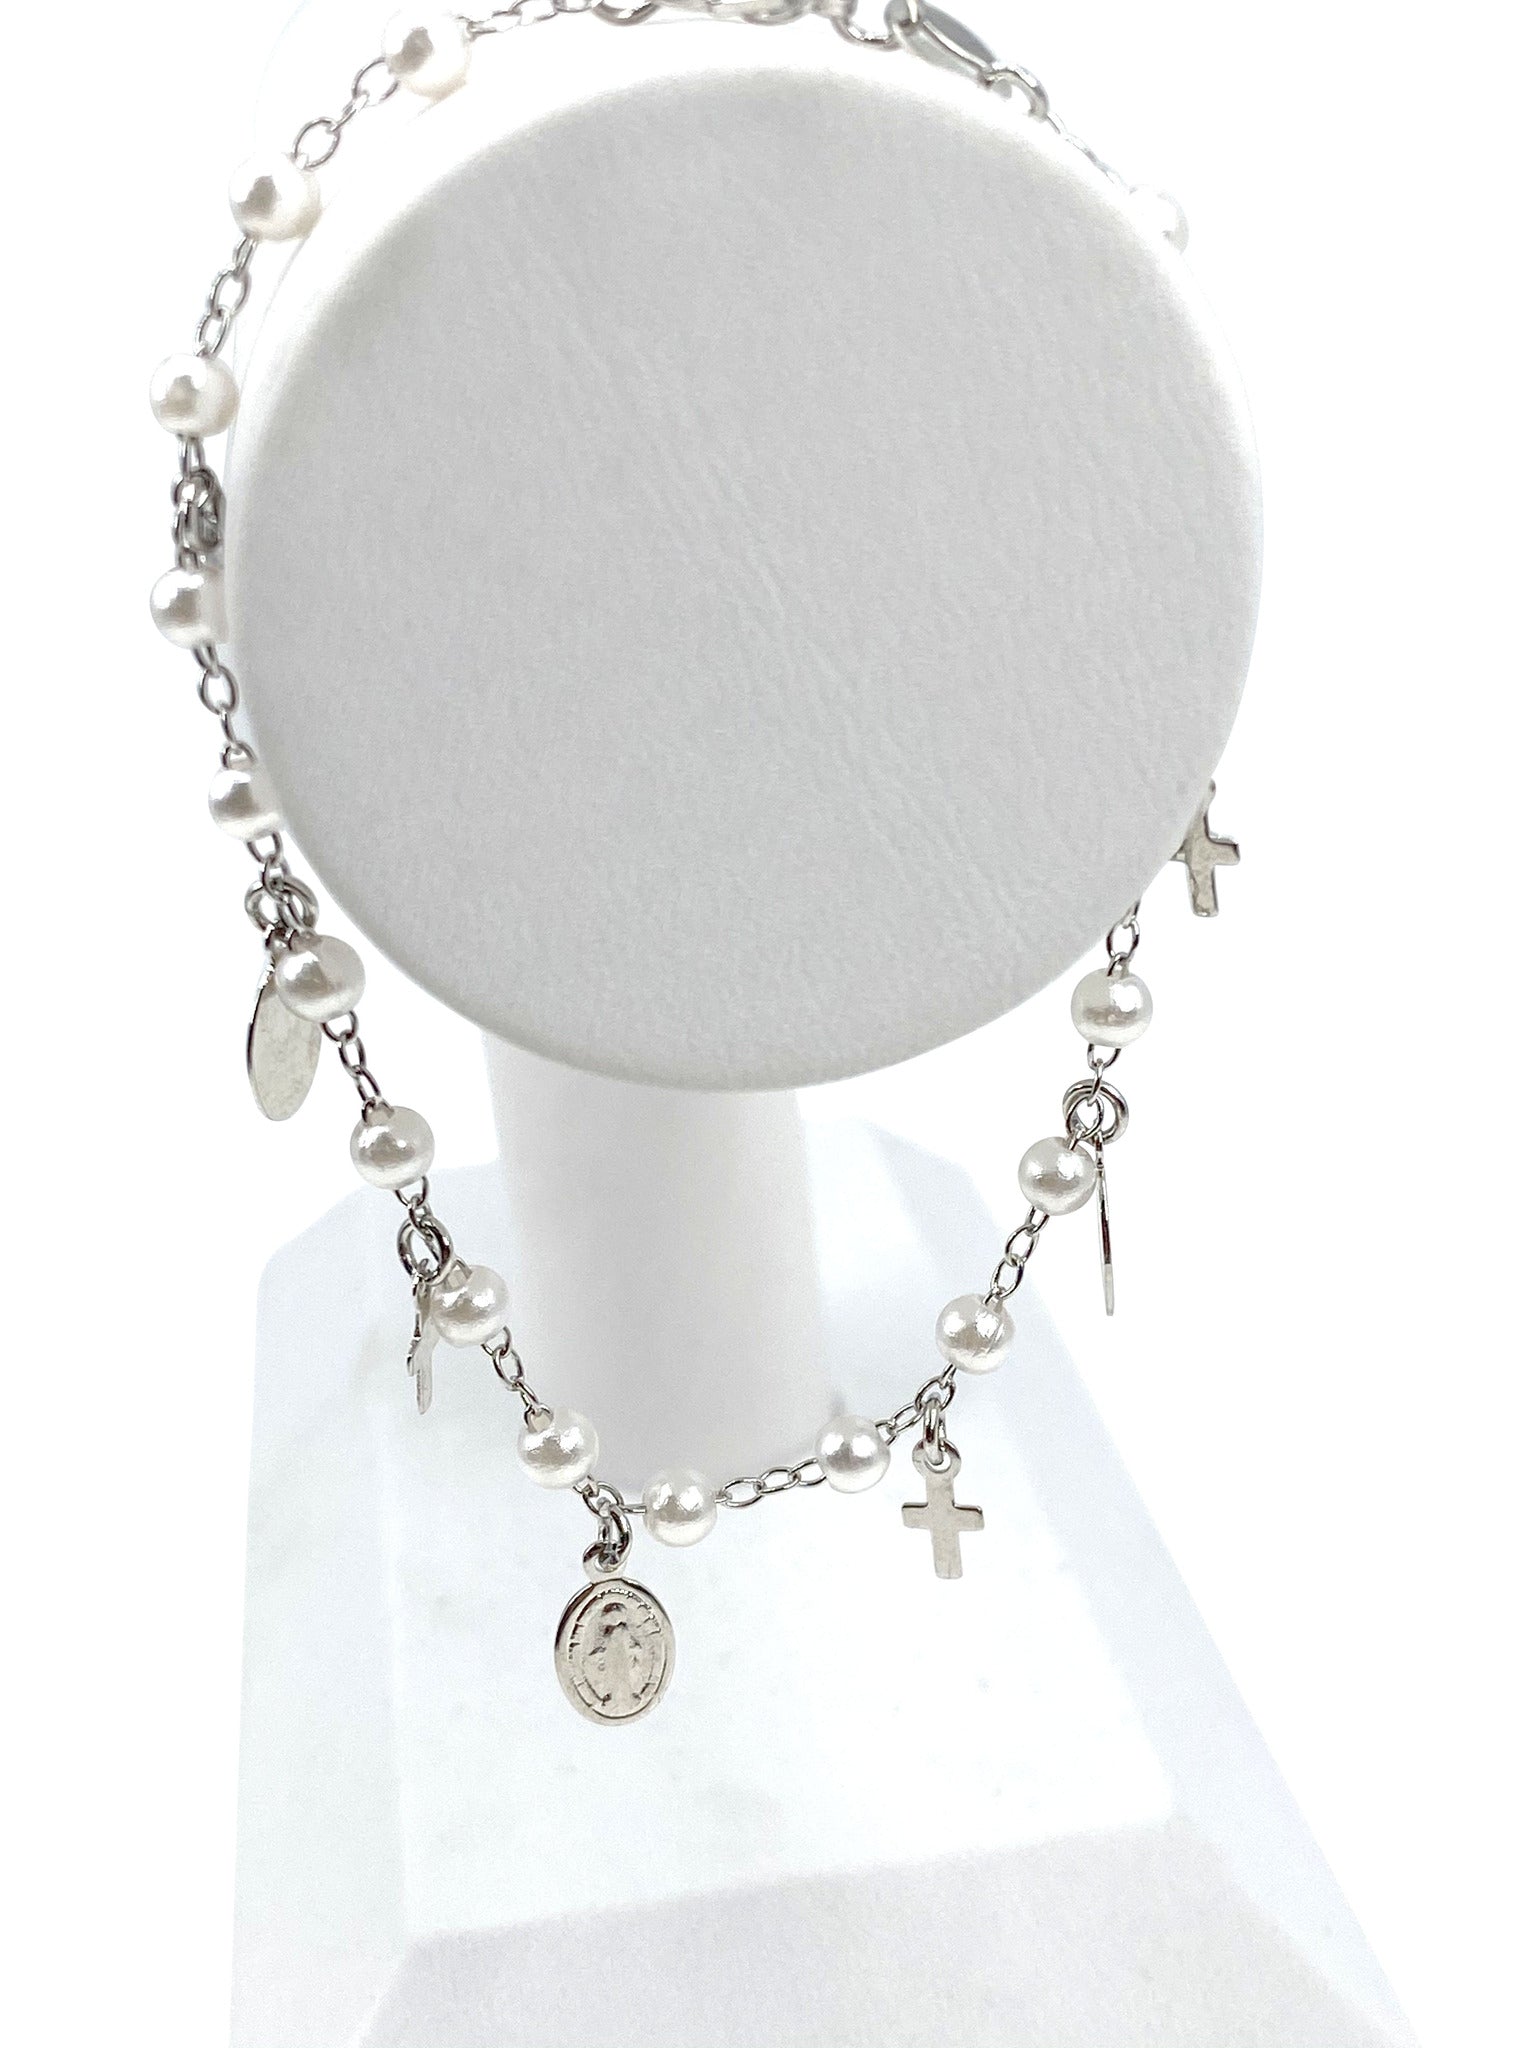 Bracelet  with simulated pearls and Our Lady of Grace and crosses charms